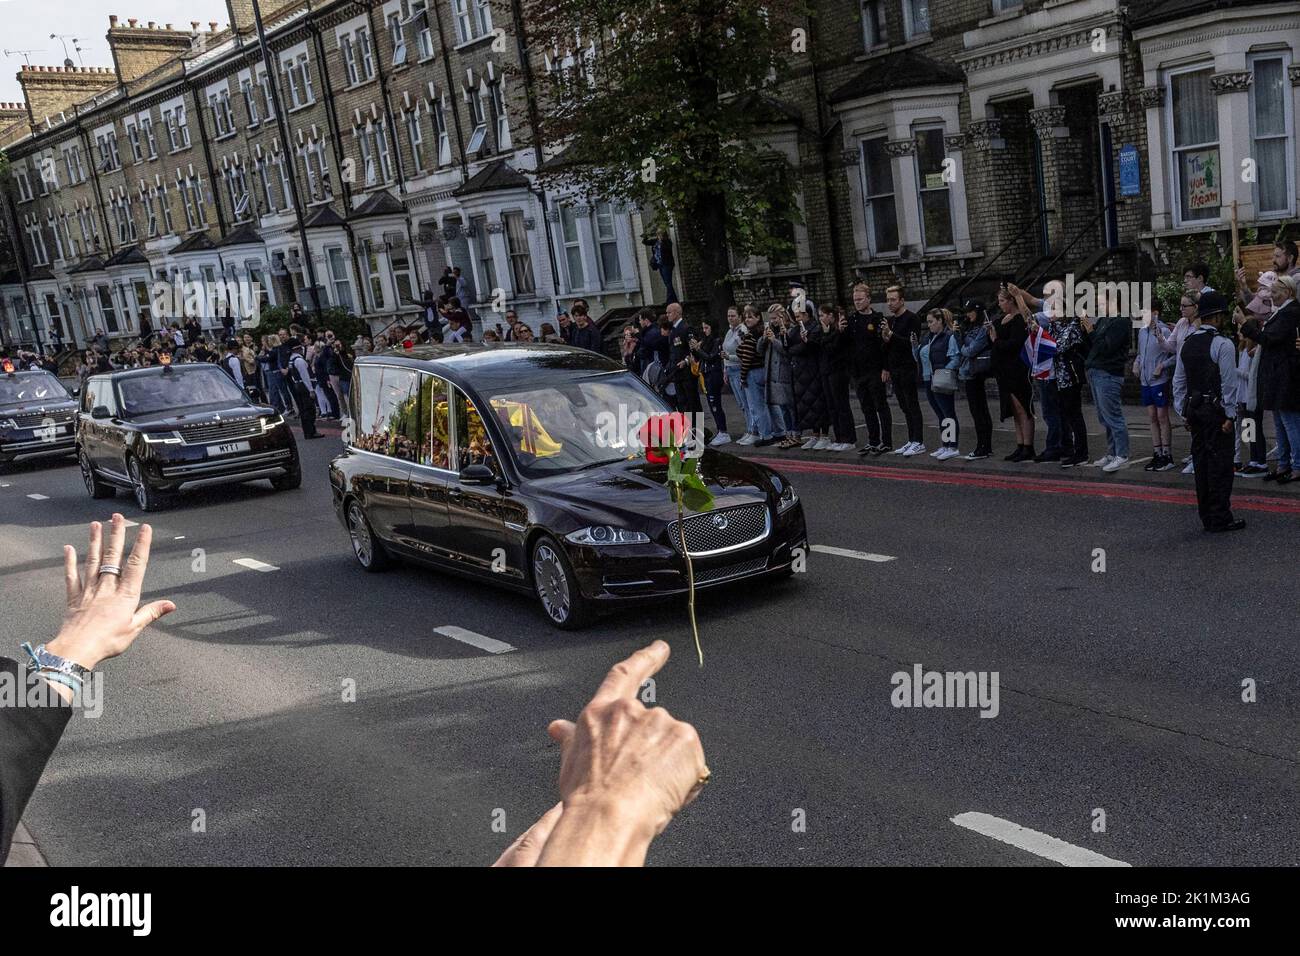 A person throws a flower towards Britain's Queen Elizabeth's coffin, as it is transported, on the day of her state funeral and burial, in London, Britain, September 19, 2022. REUTERS/Carlos Barria Stock Photo